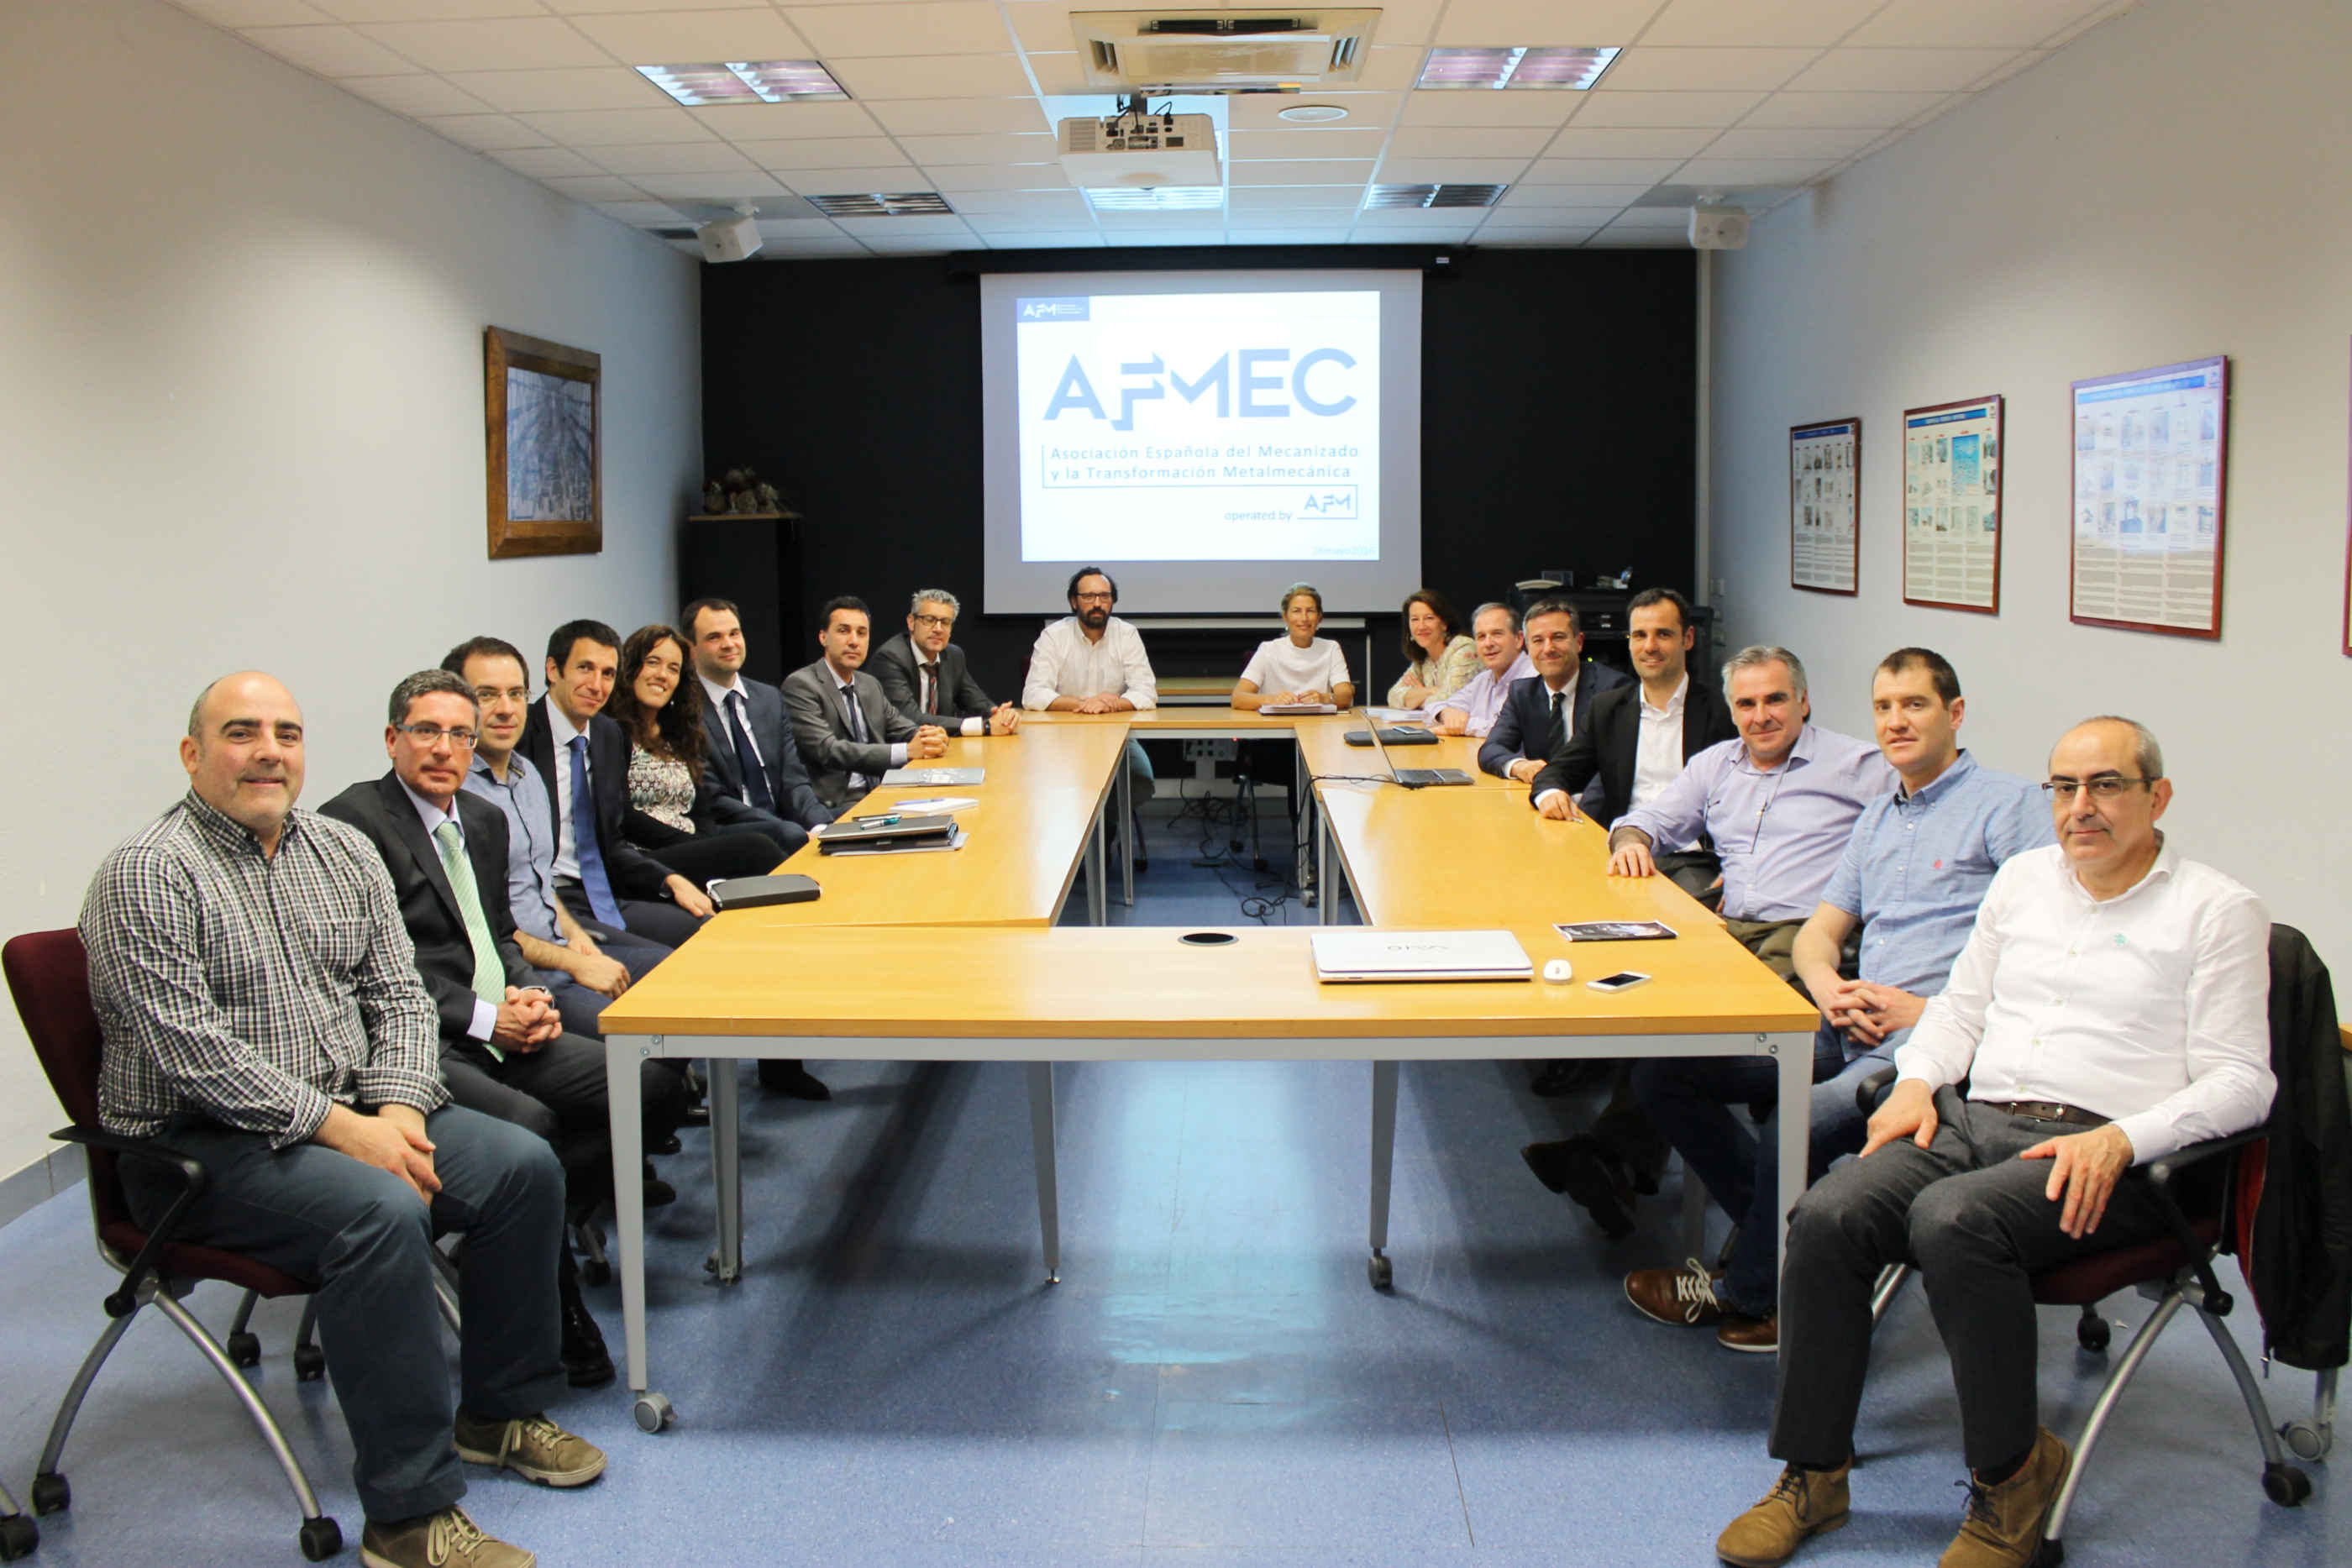 A new association for the machining world has been created: AFMEC